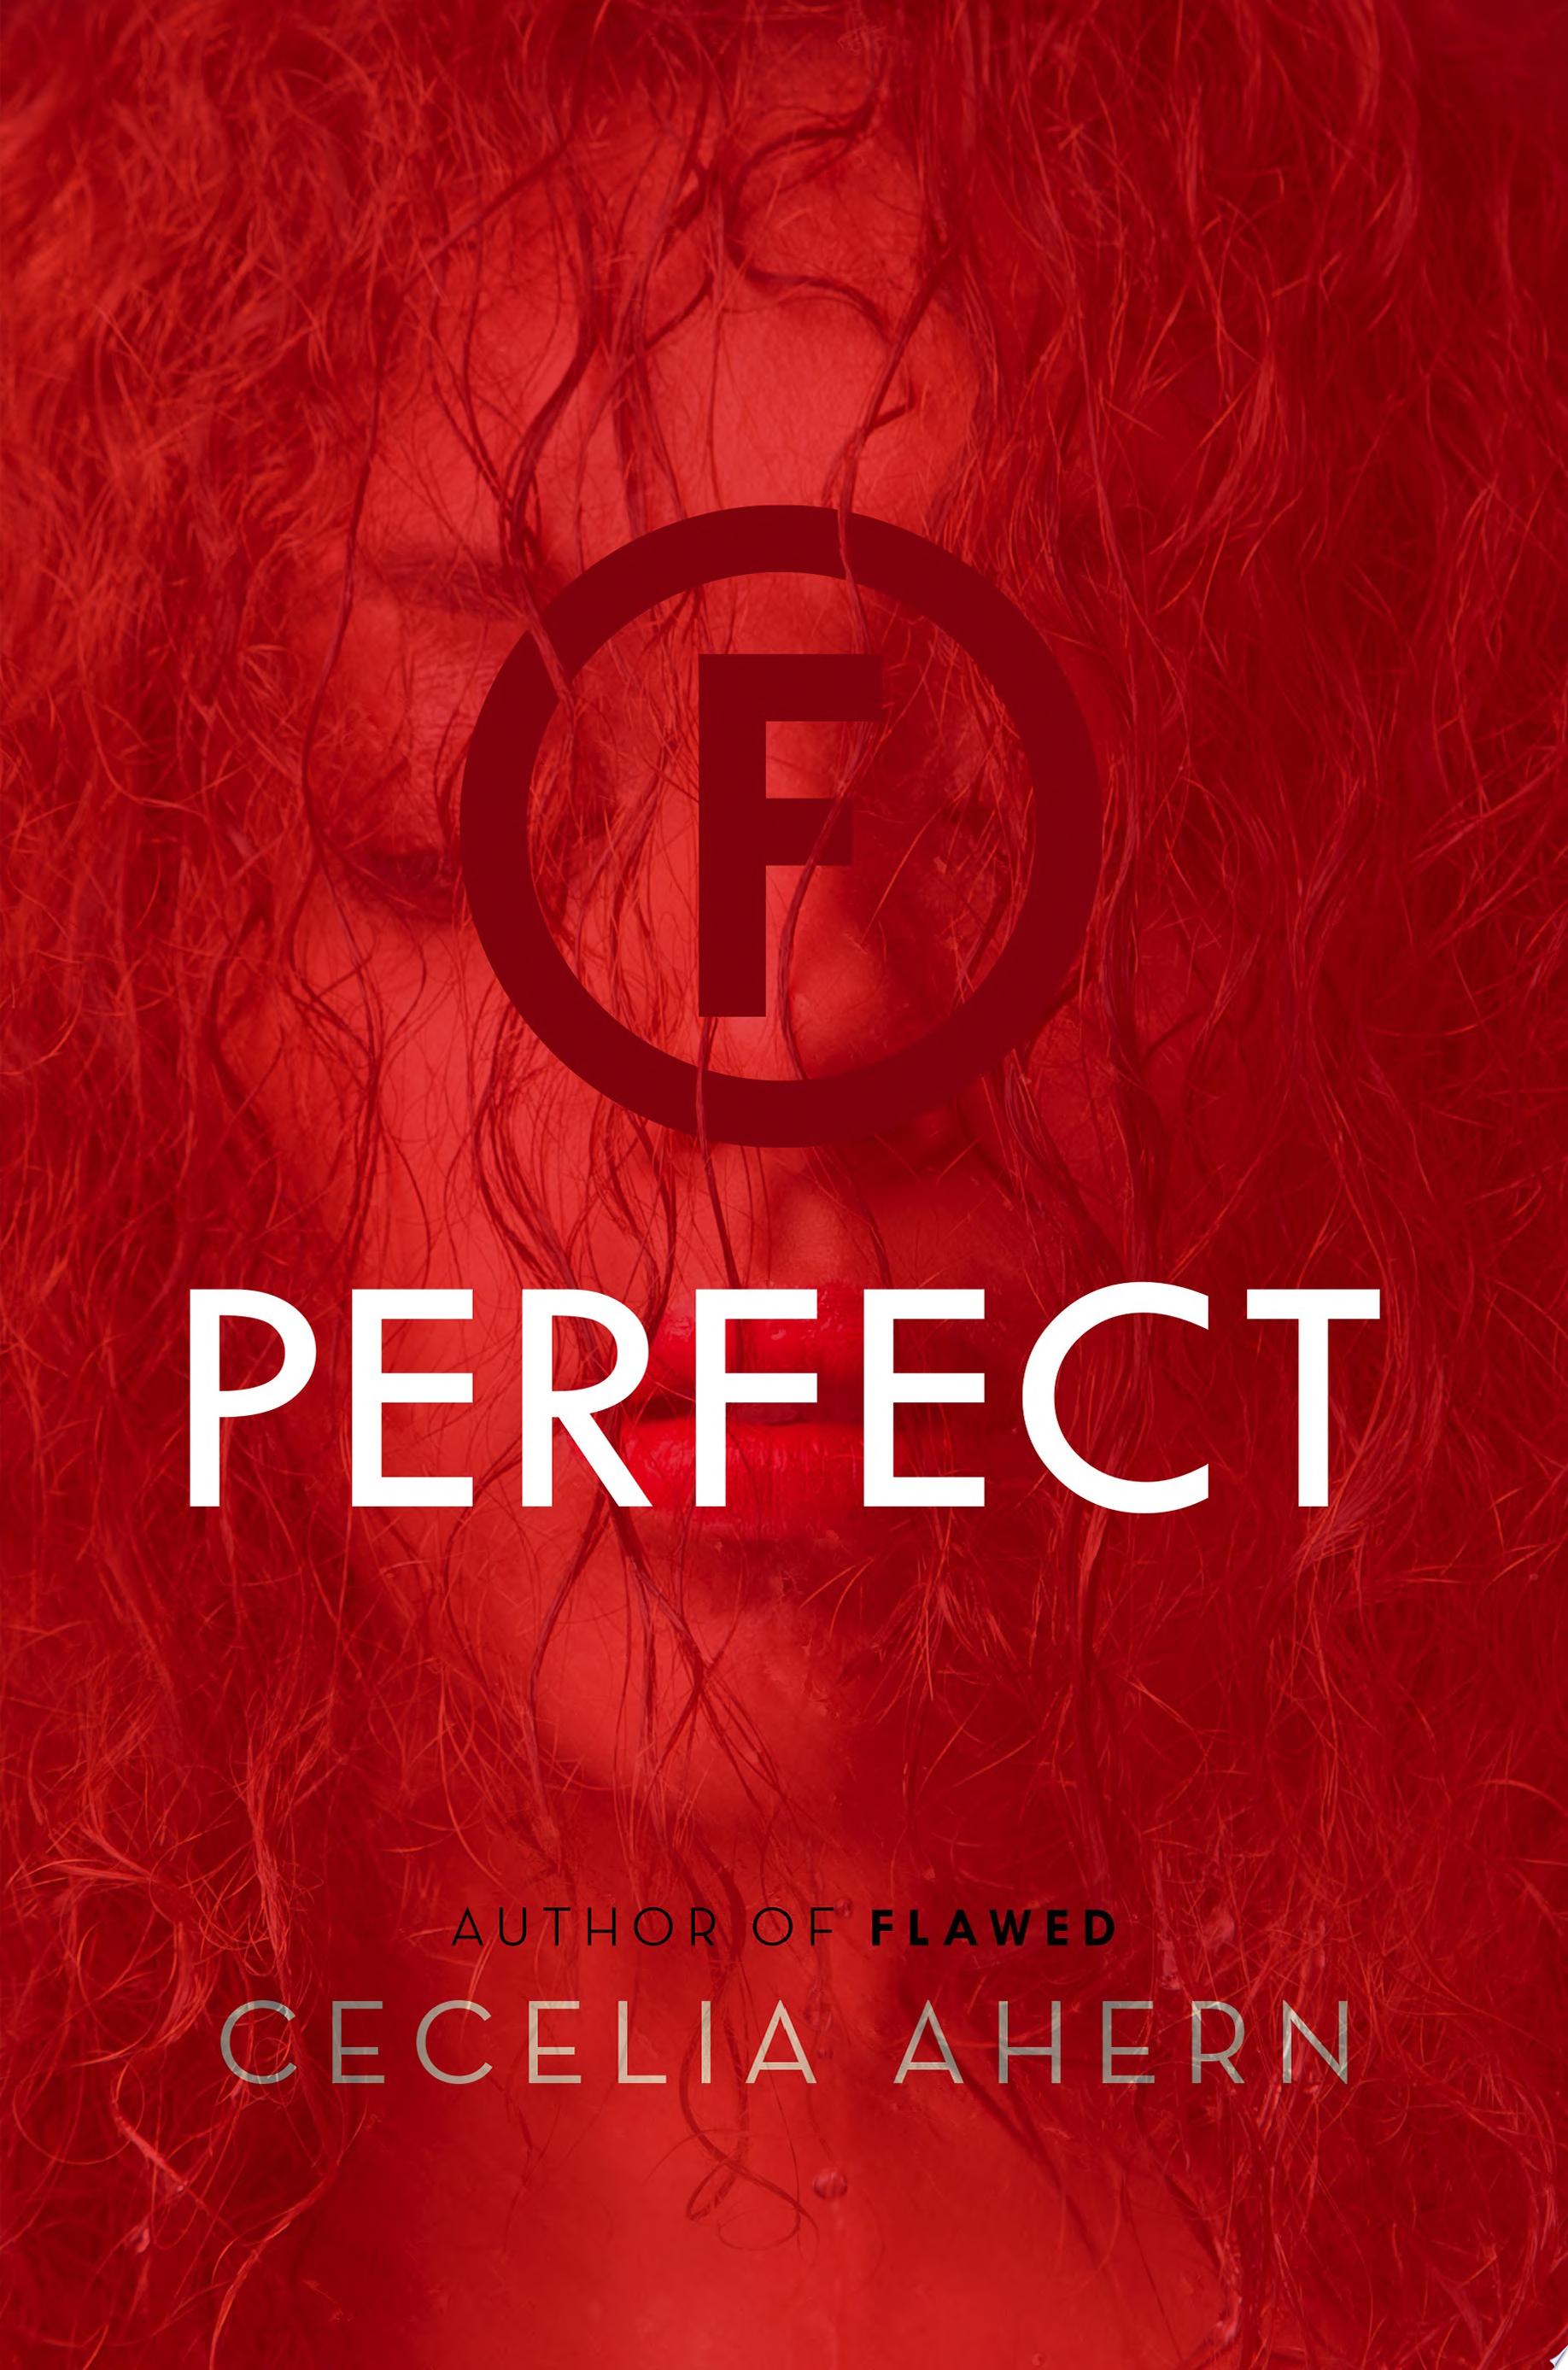 Image for "Perfect"